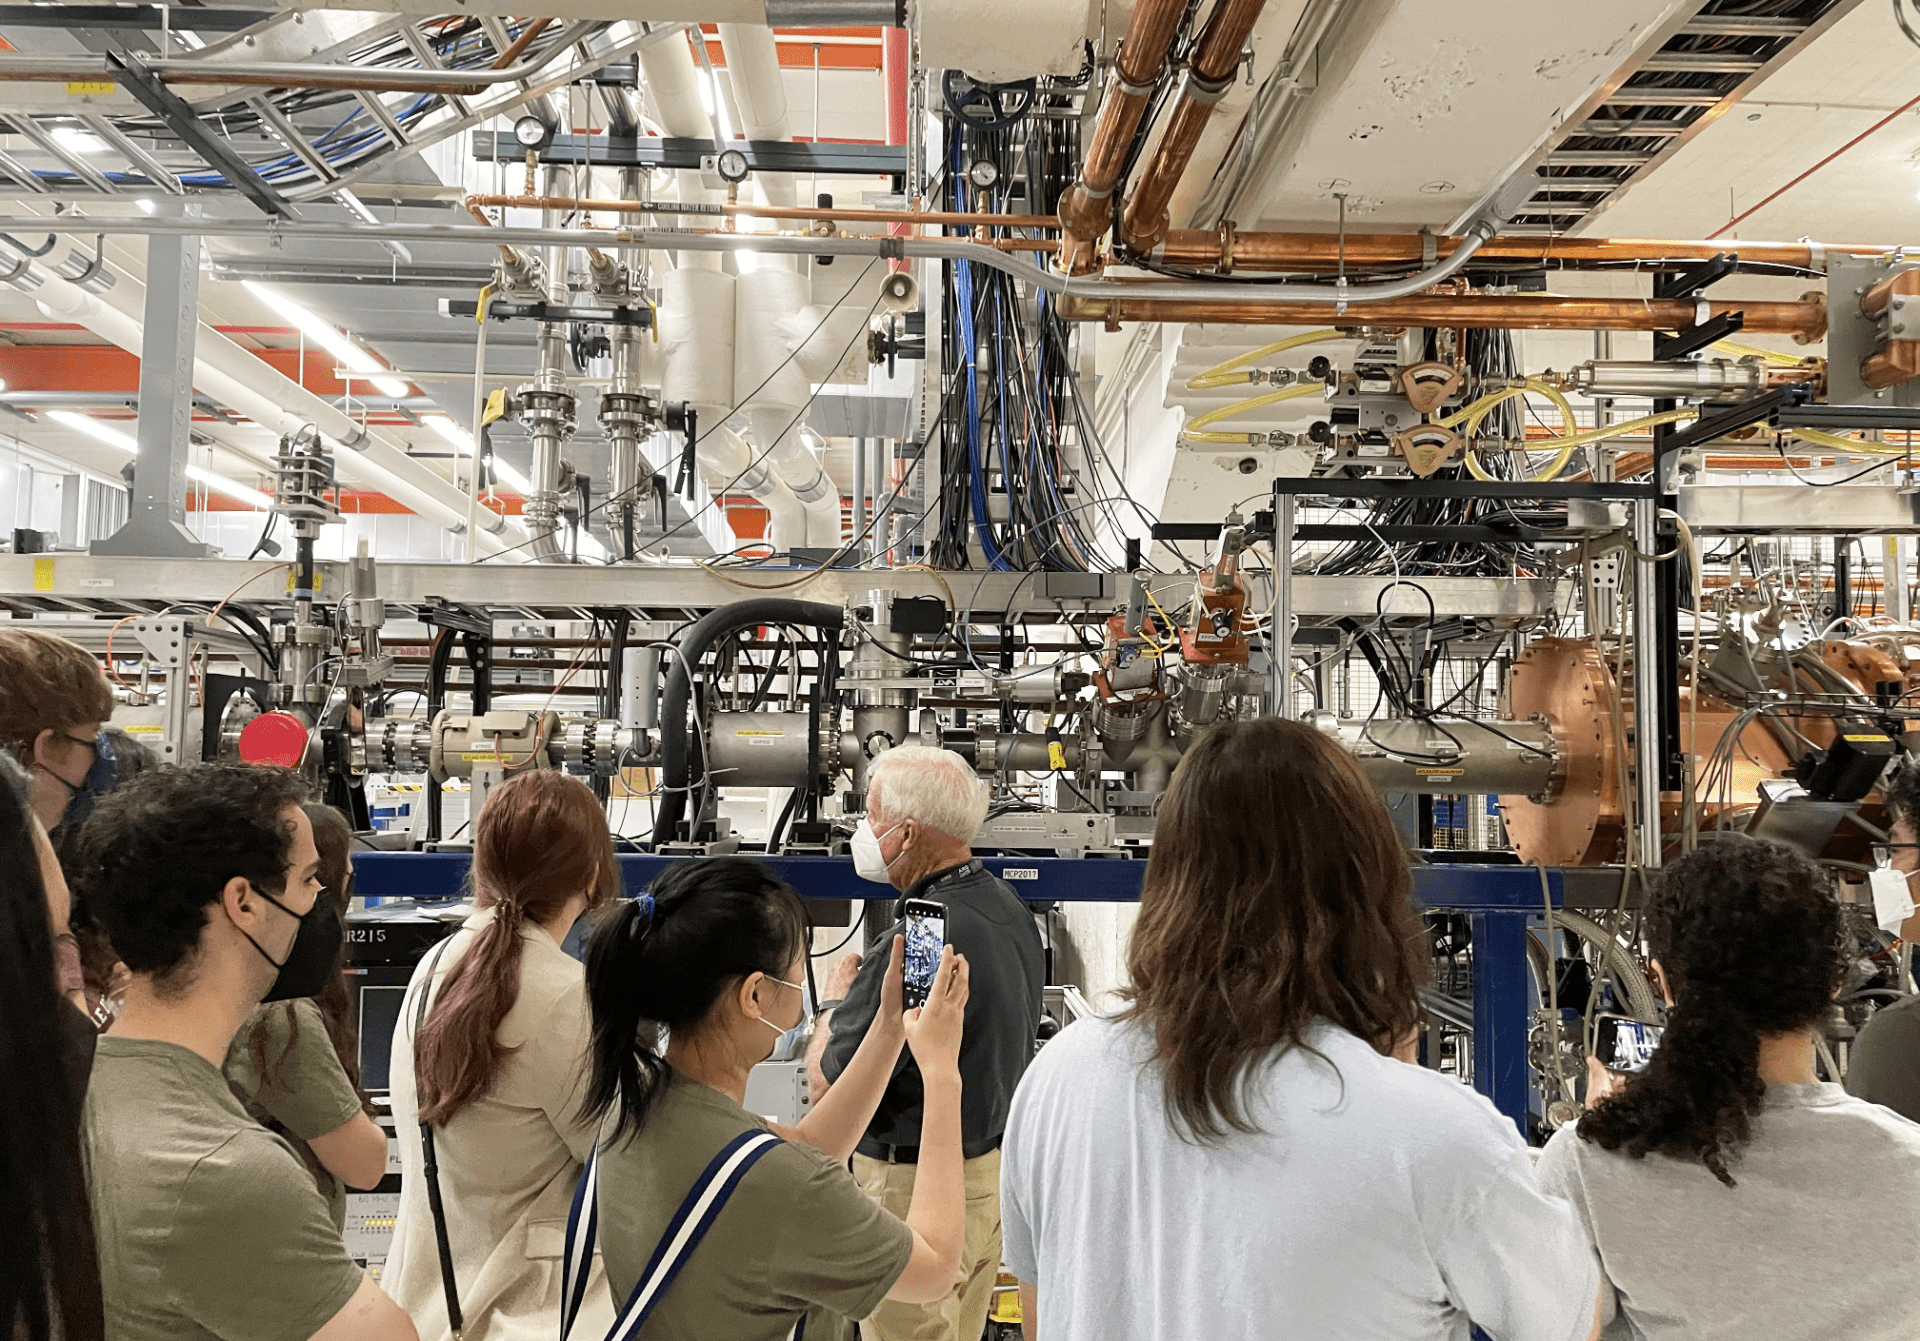 SISRM fellows look at parts of the particle accelerator at the Argonne National Laboratory